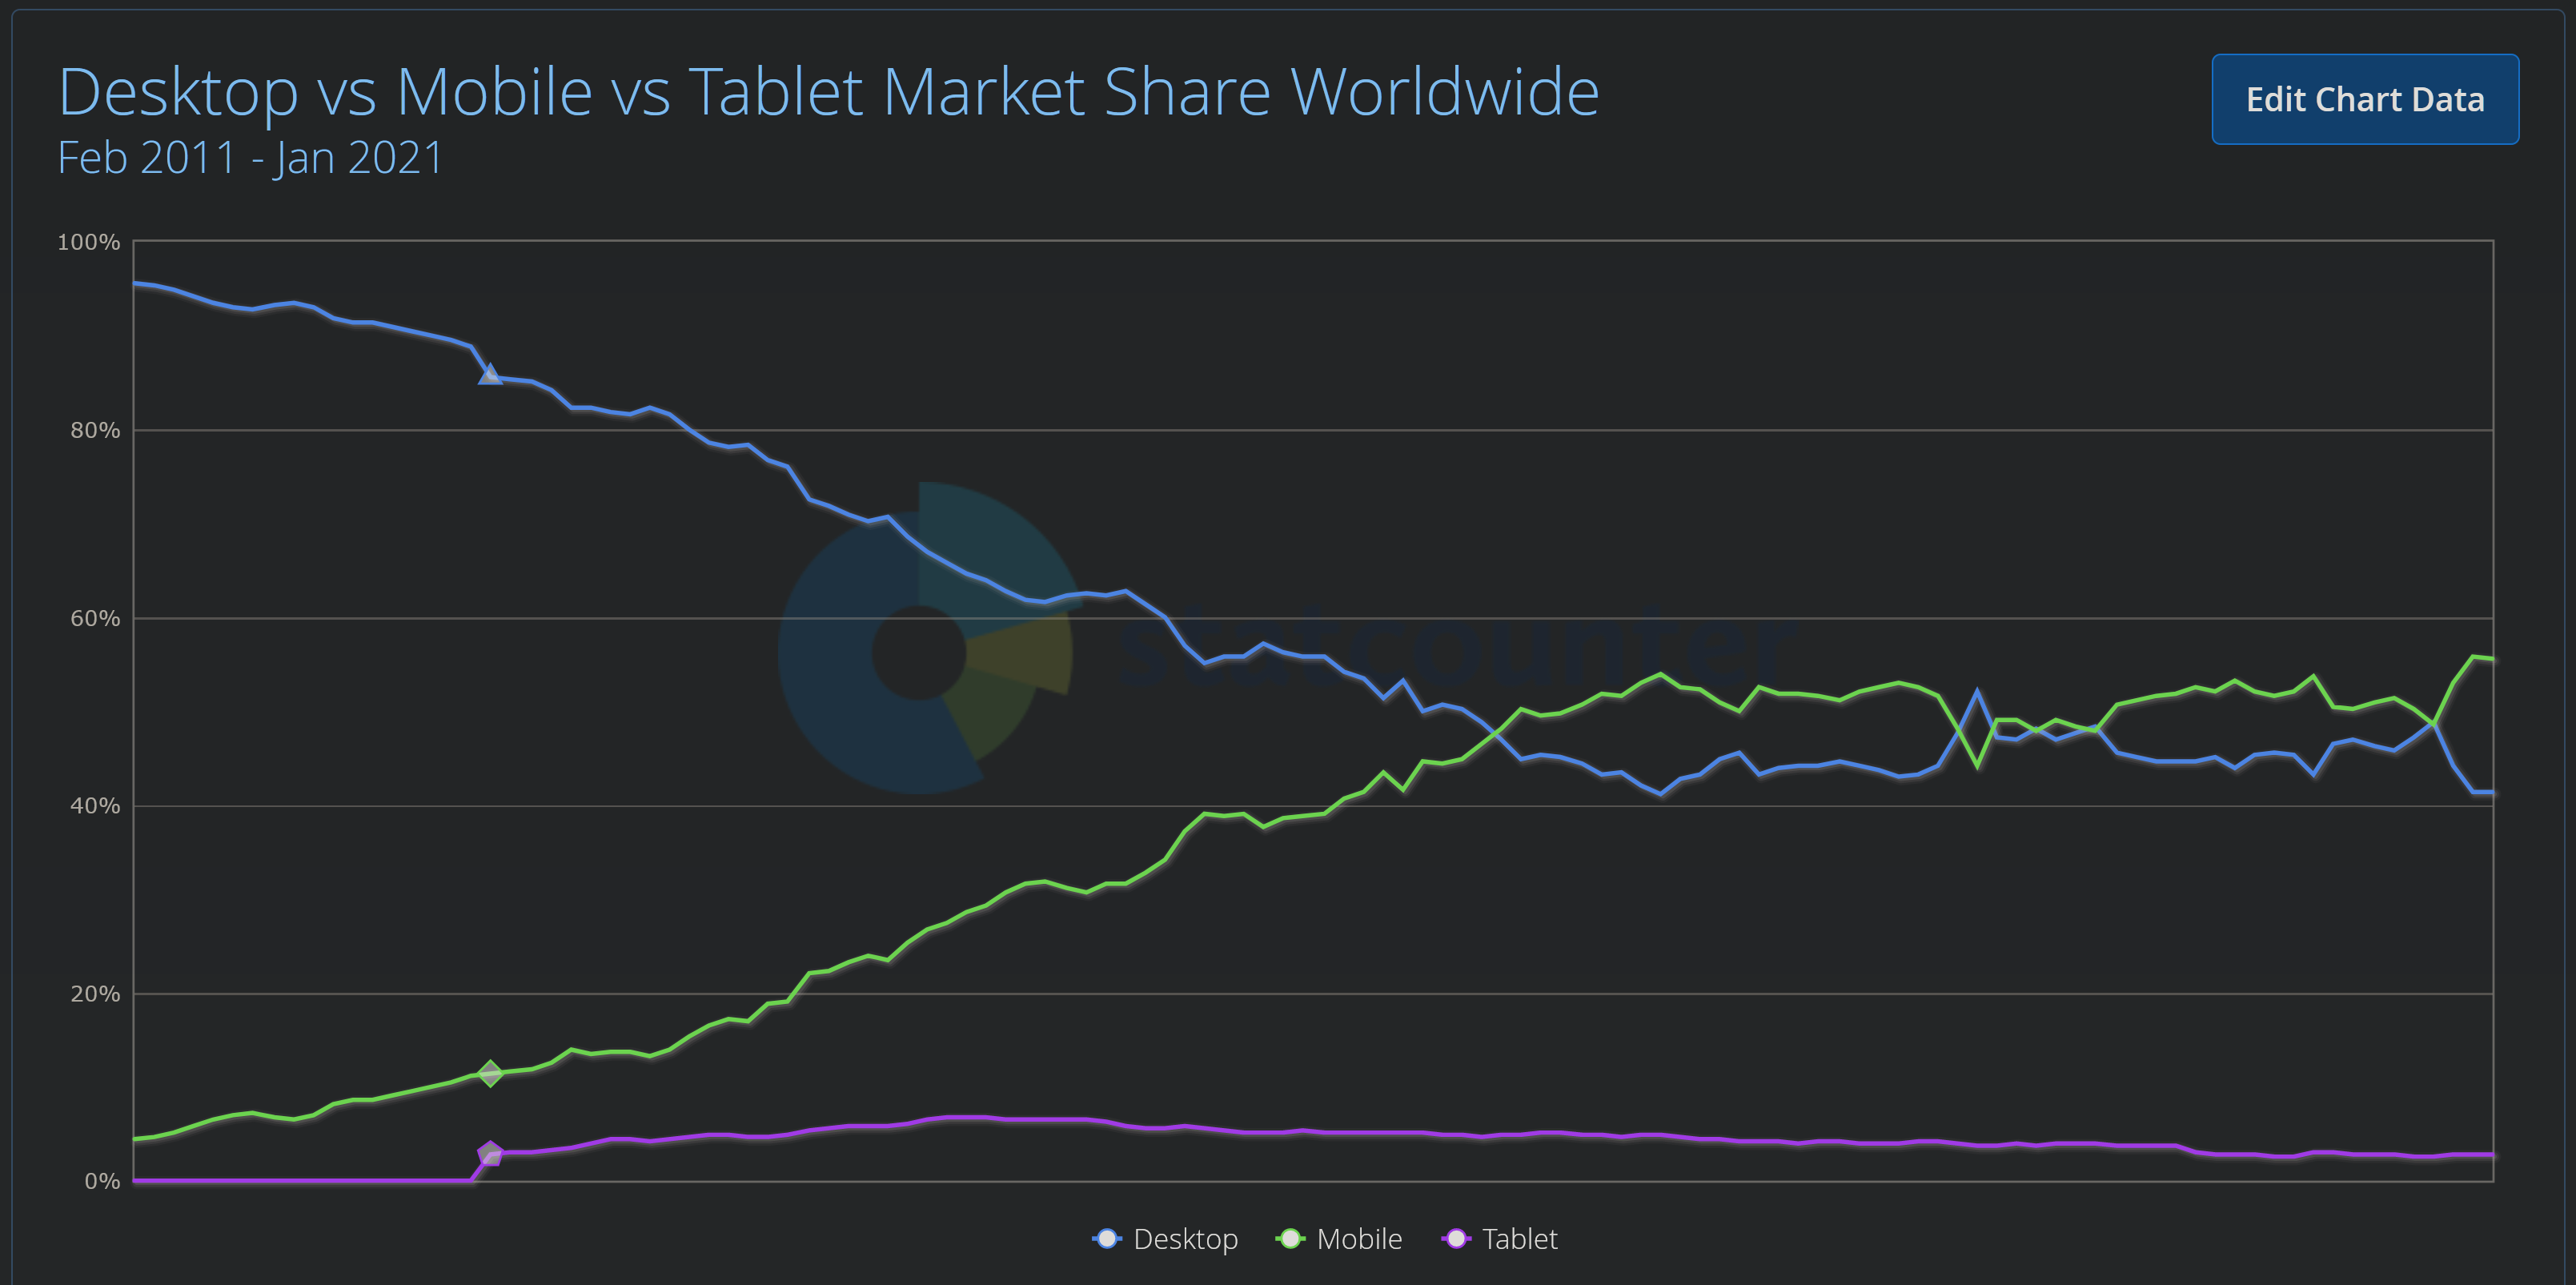 Three lines on a chart signifying usage of desktop (trending down from roughly 95% to around 50% halfway through our timeline); mobile (the inverse of desktop, starting near 5% and hovering around 50% at about the halfway point in the timeline); and tablet (Starting at 0%, then sticking around 5%).